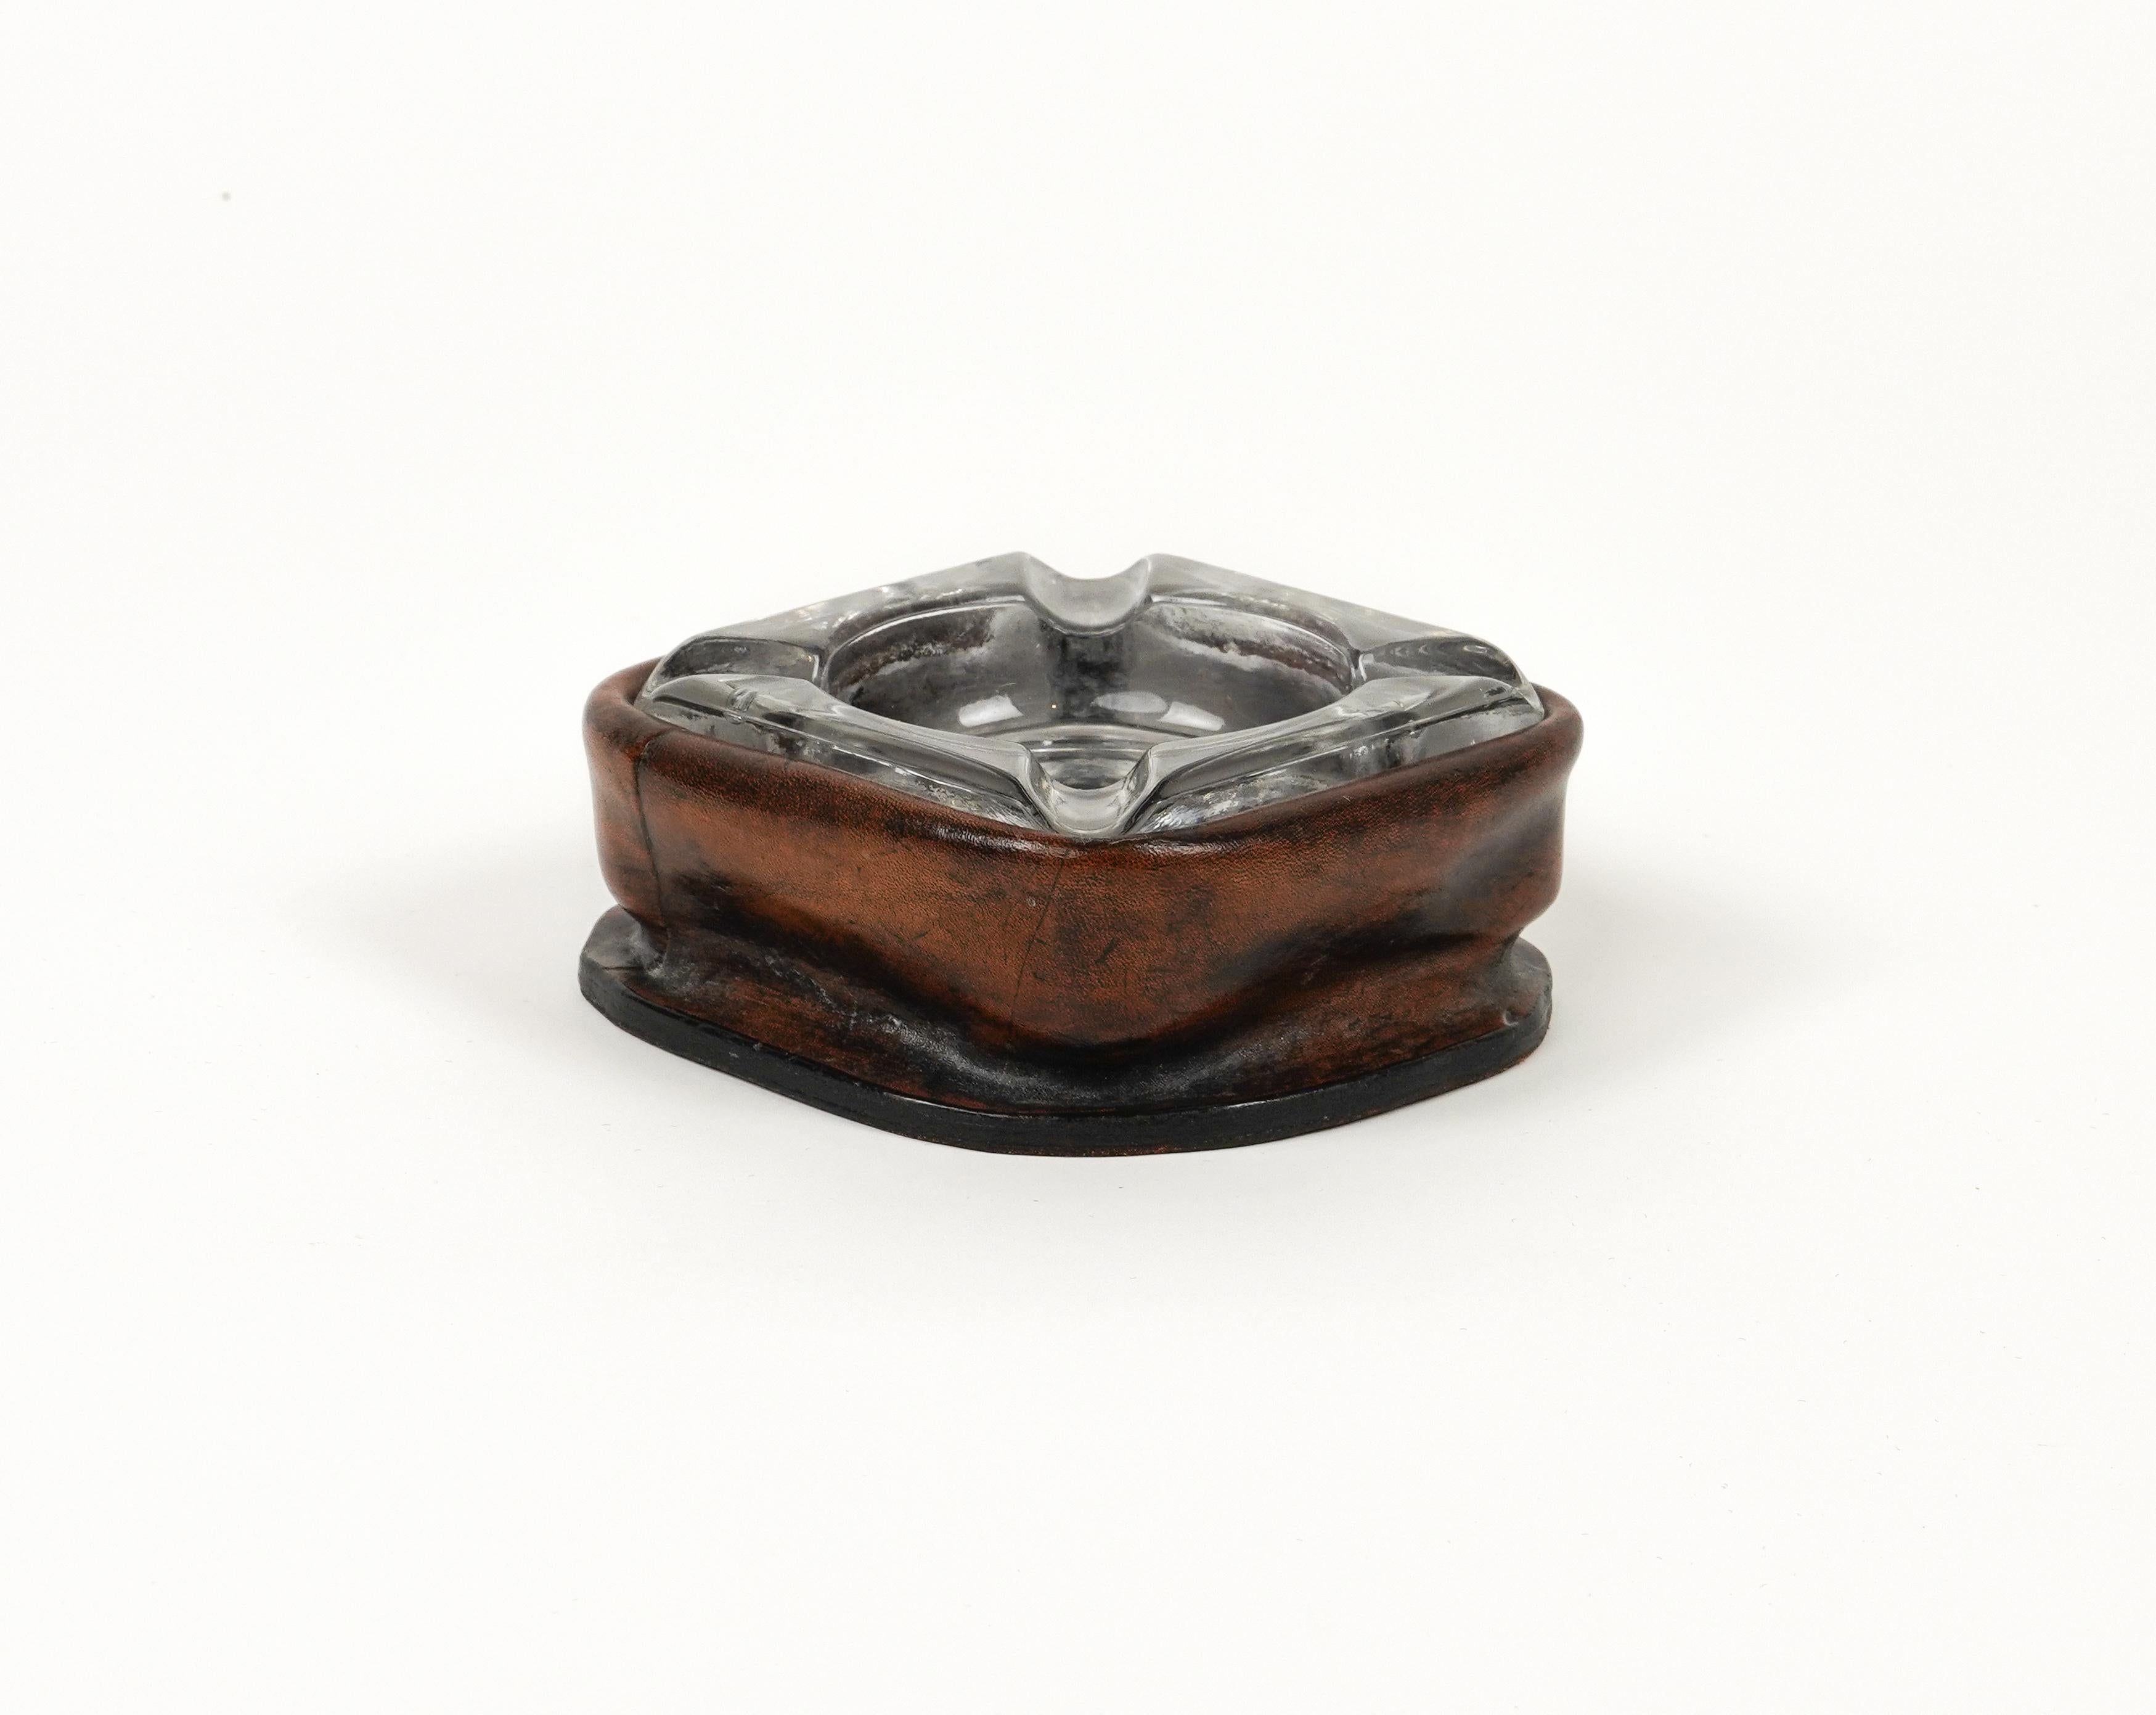 Italian Midcentury Squared Ashtray in Leather and Glass Jacques Adnet Style, Italy 1970s For Sale